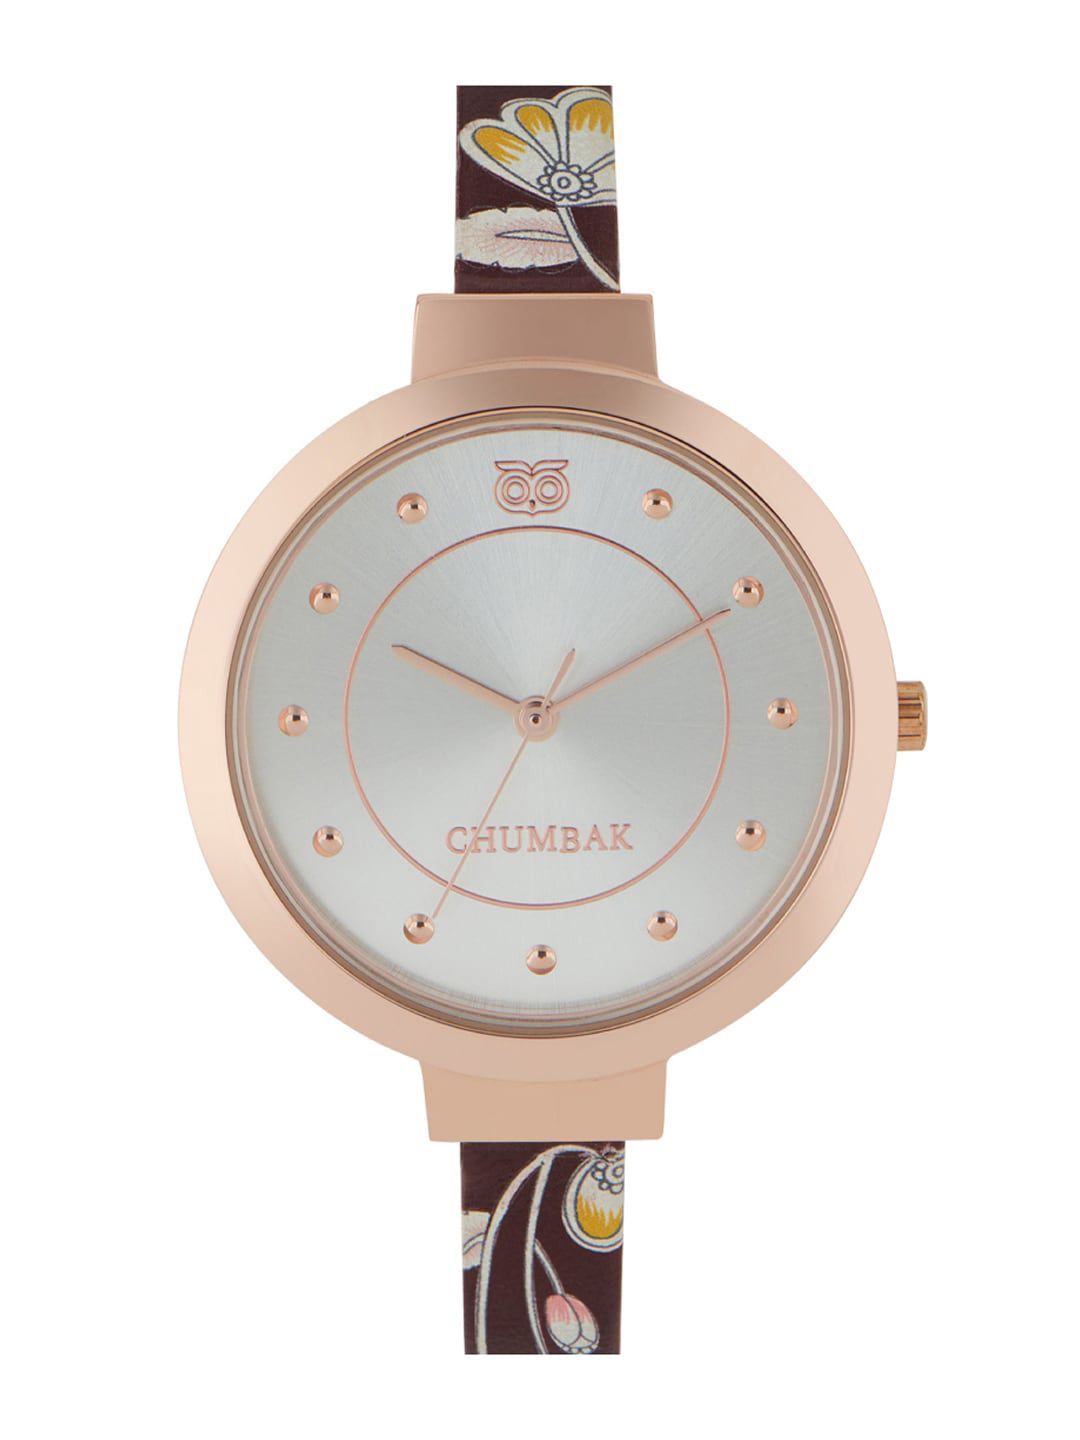 Chumbak Women Silver-Toned Dial & Maroon Leather Straps Analogue Watch 8907605106019 Price in India